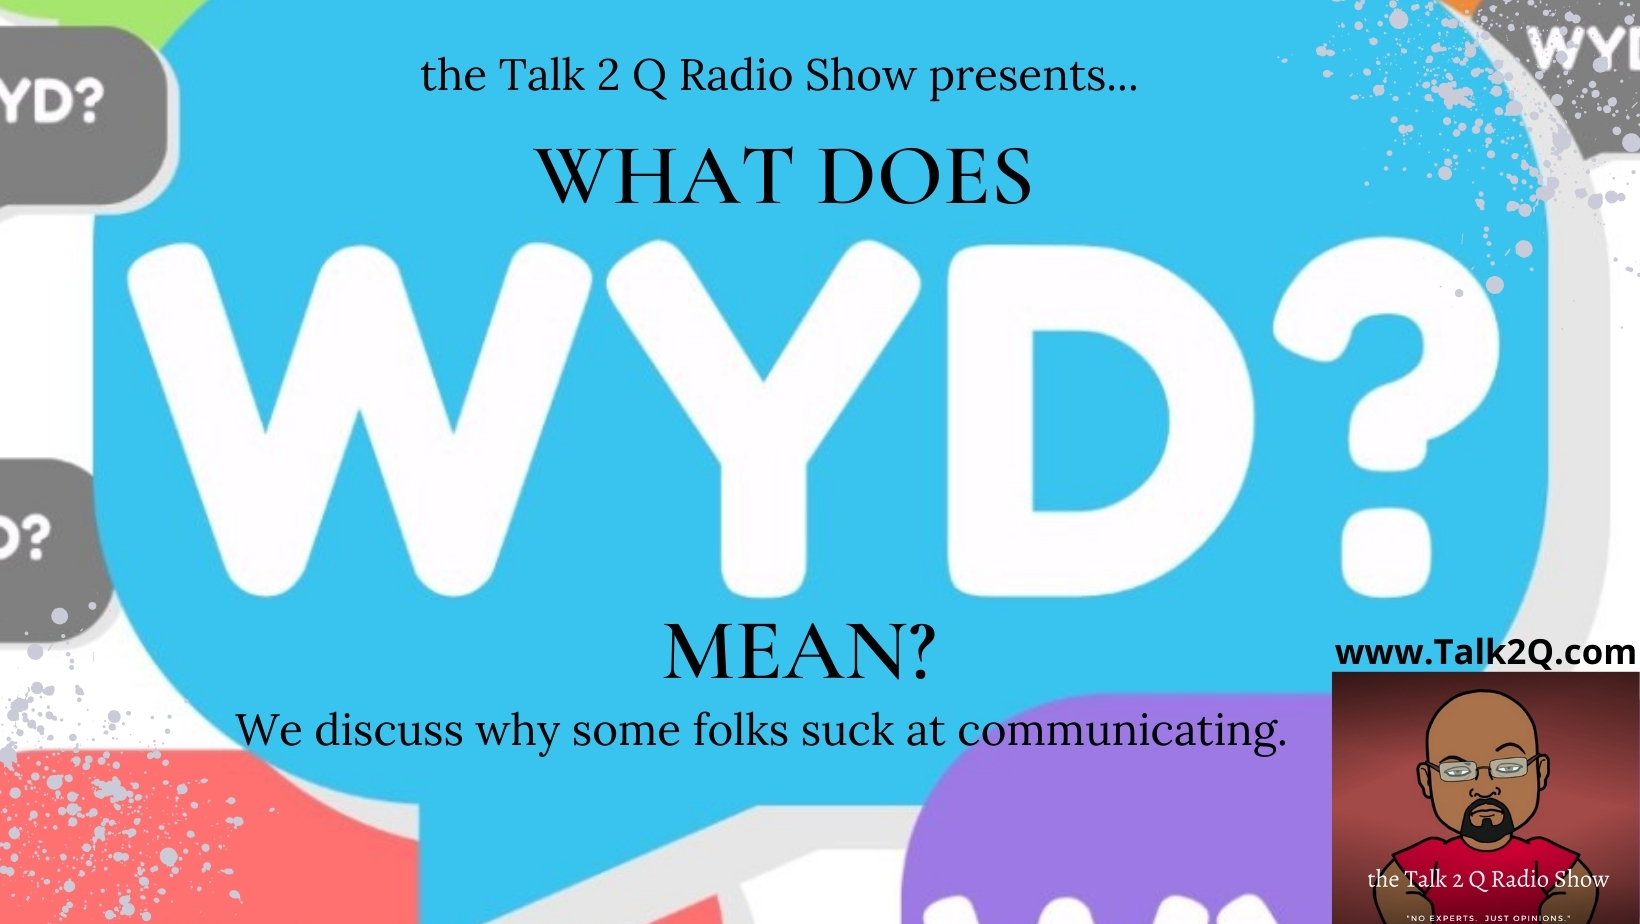 What Does 'WYD' Mean?